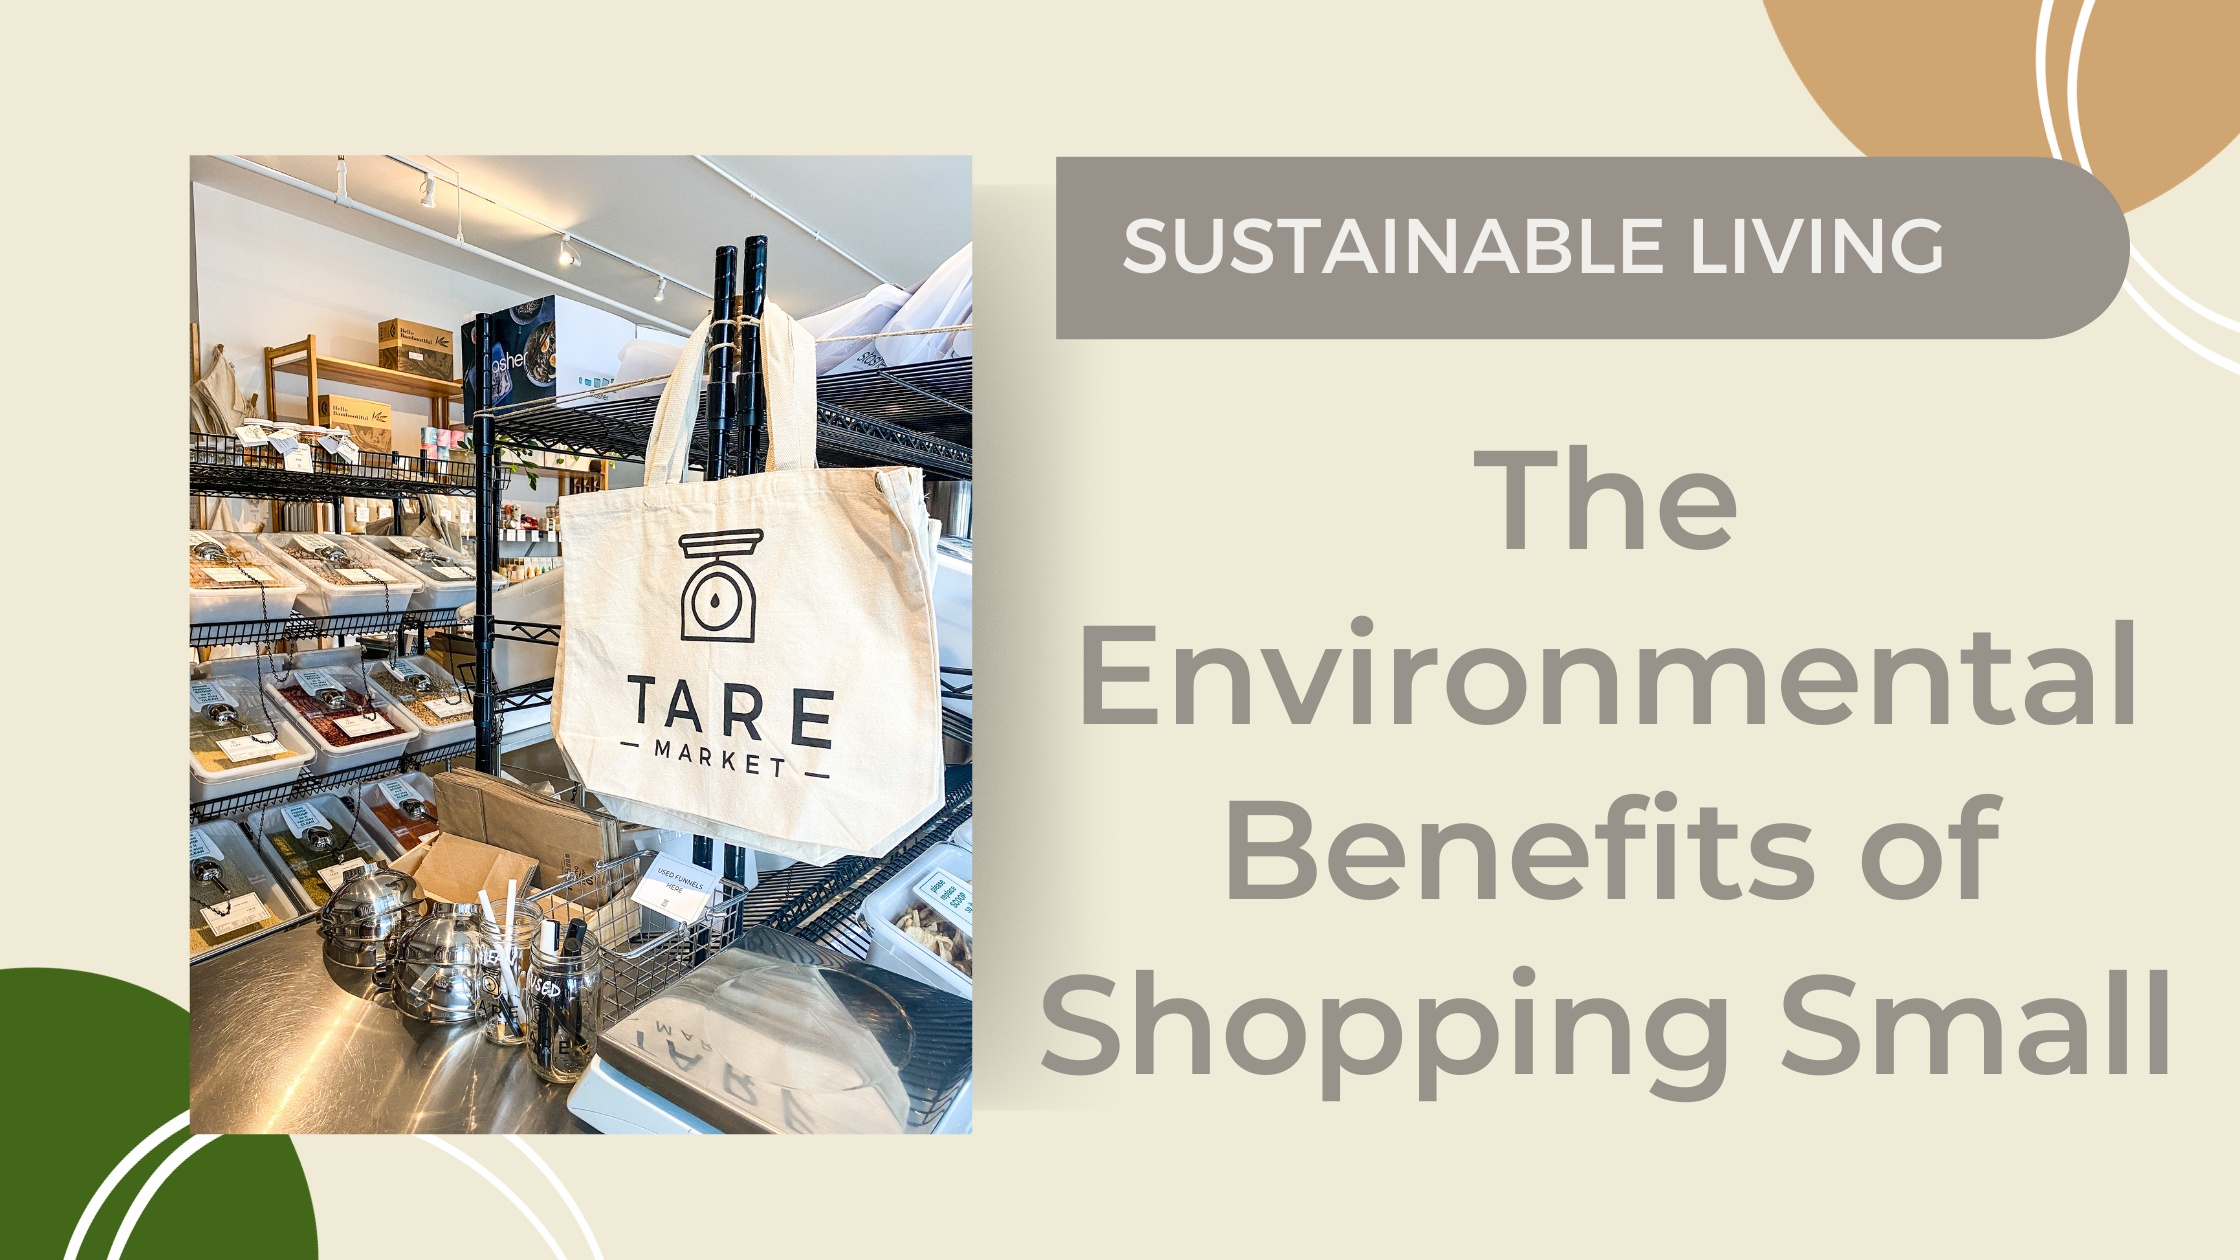 The Environmental Benefits of Shopping Small